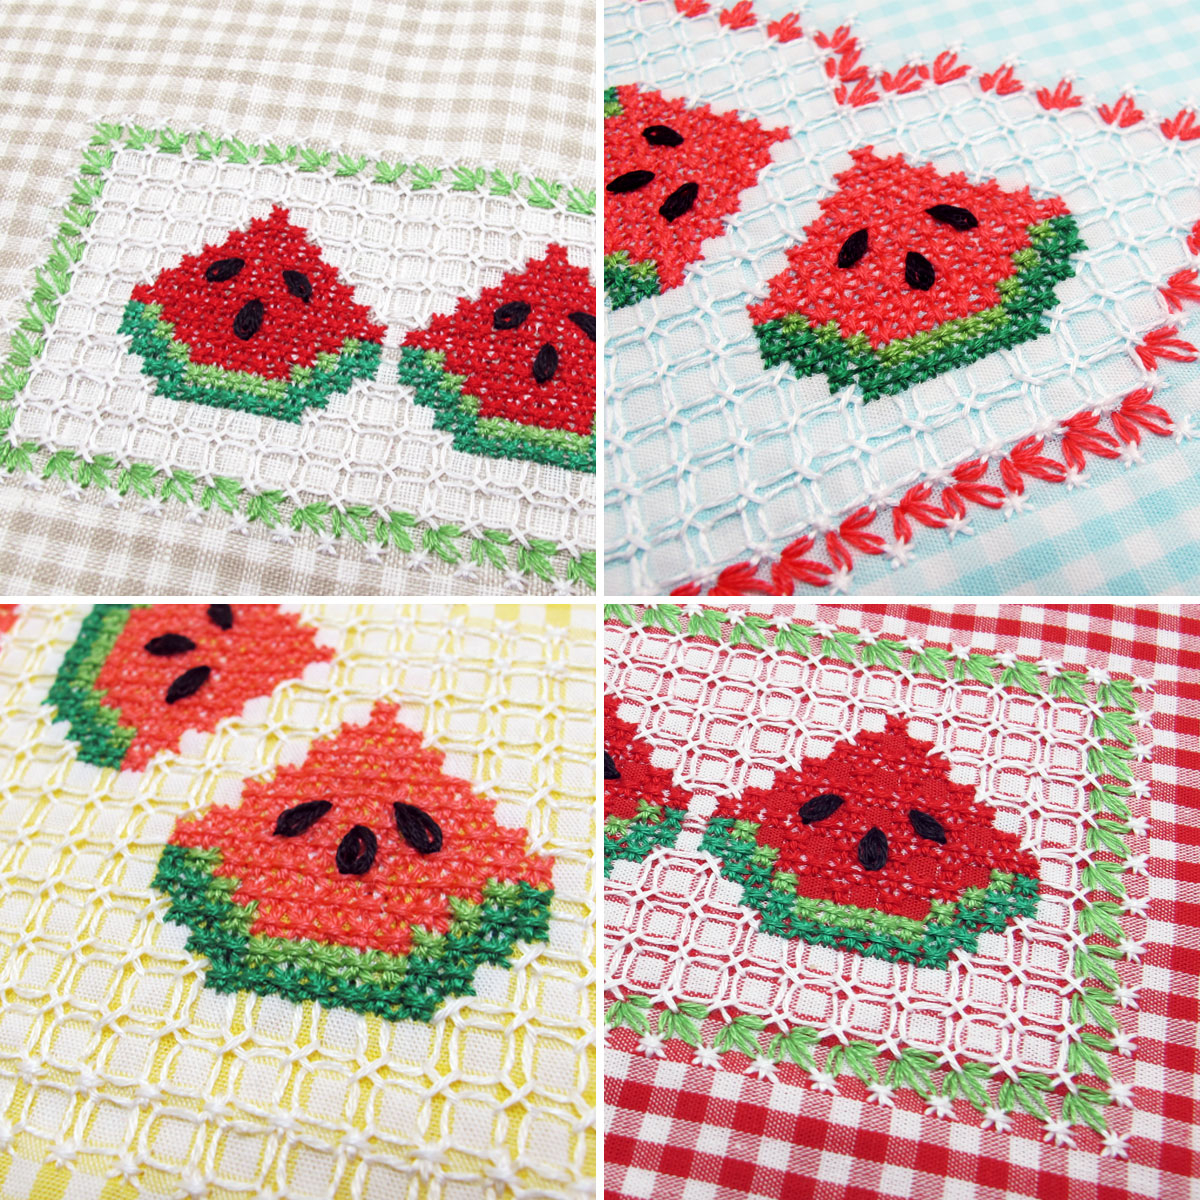 Chicken Scratch Embroidery Patterns Diy Watermelon Embroidery